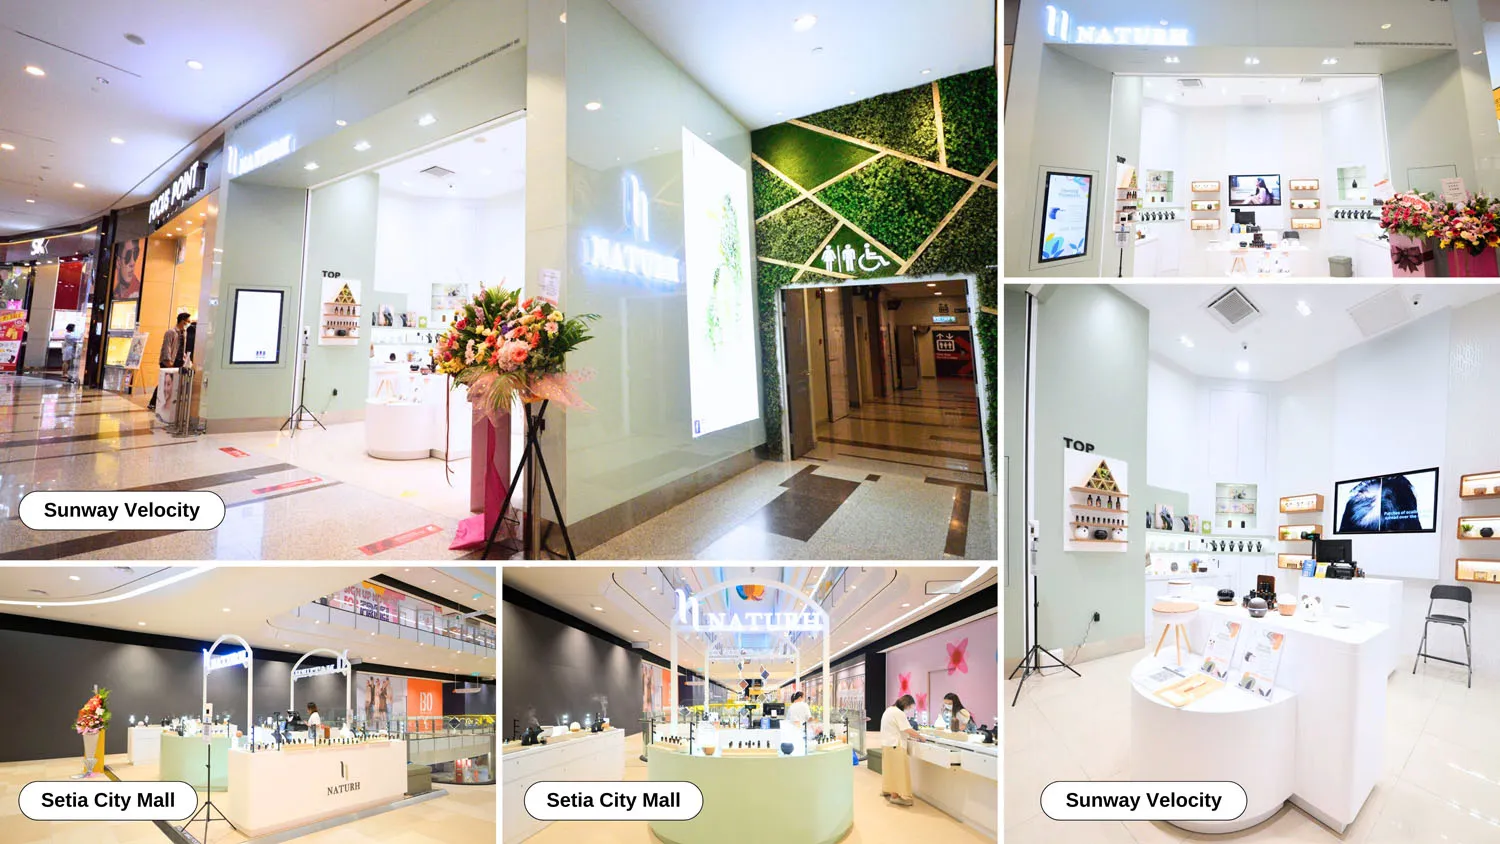 A collage photo of Naturh Brand at Sunway Velocity and Setia City Mall